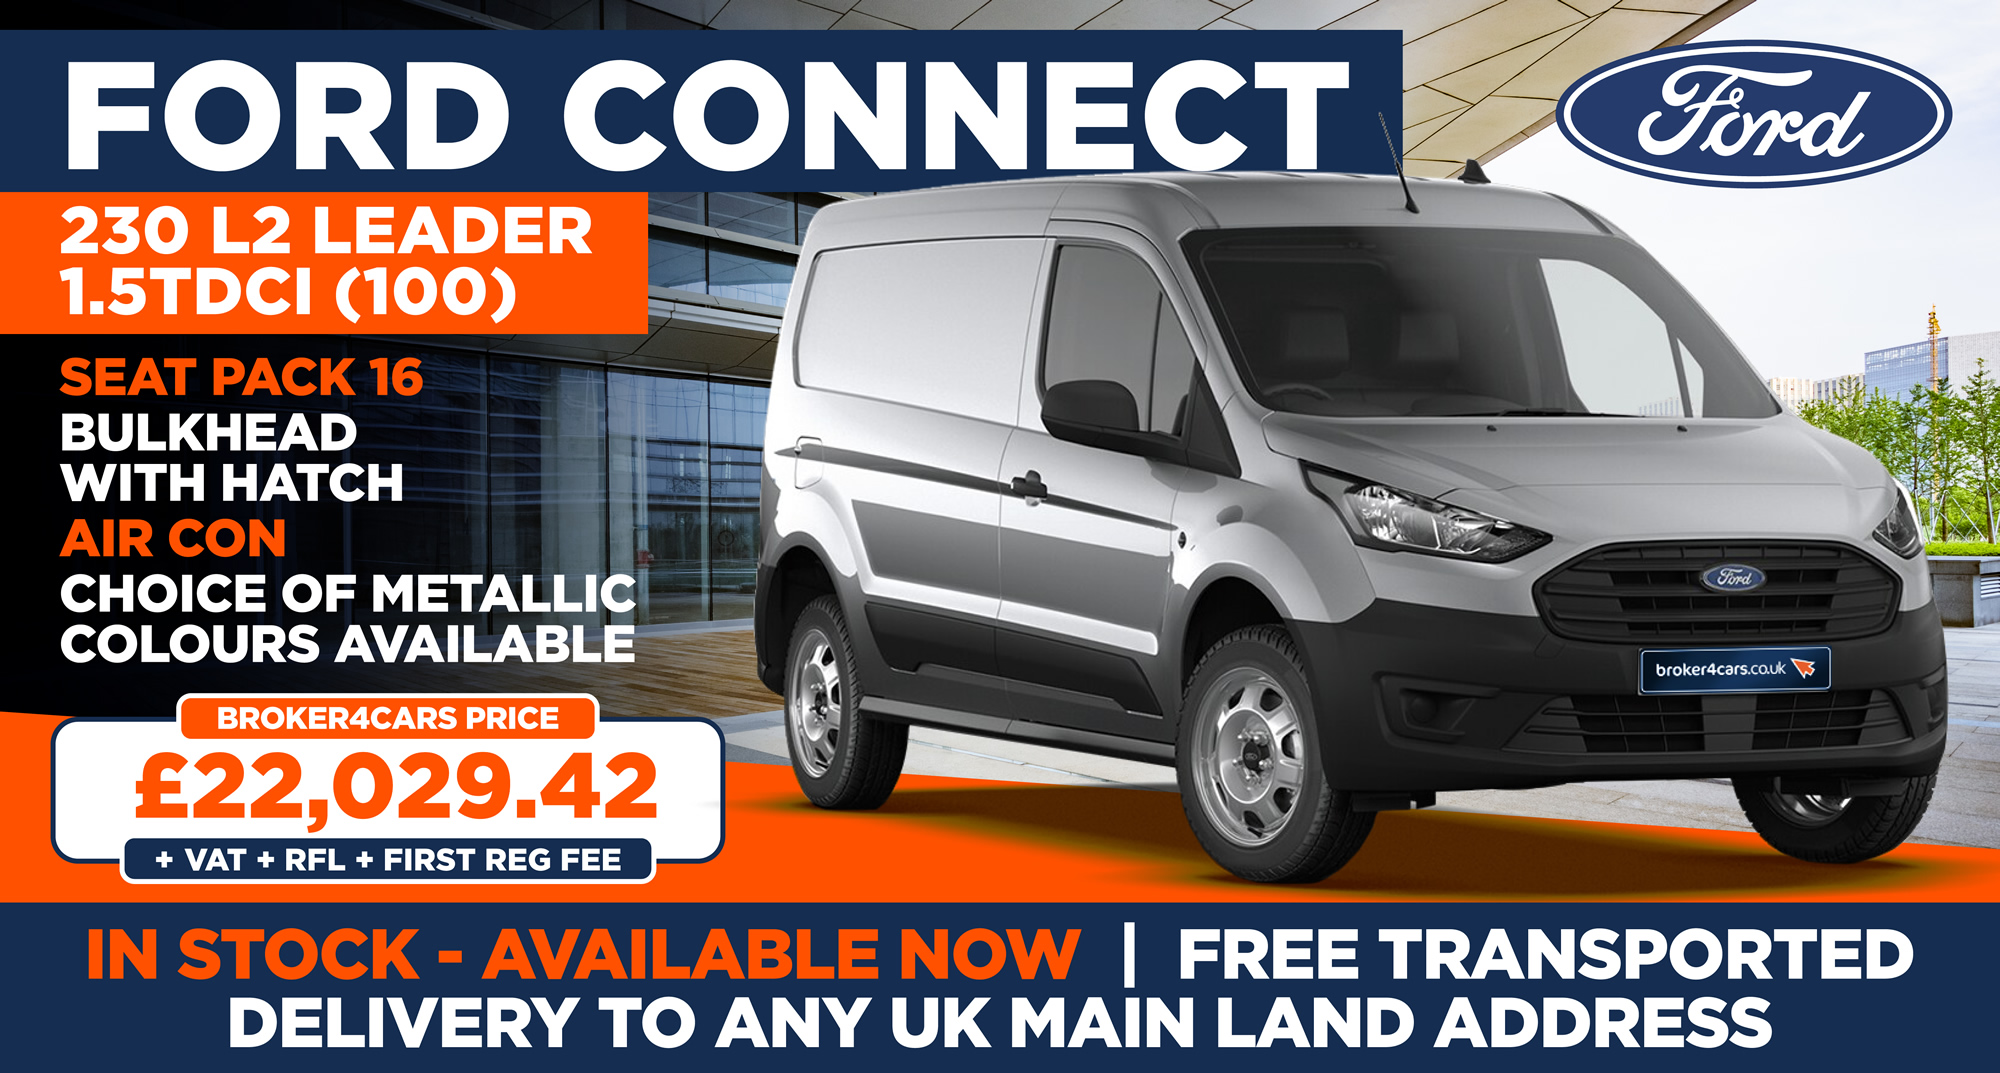 Ford Connect 230 L2 Leader 1.5TDCI (100)Seat Pack 16, Bulkhead with Hatch, Air Con, Choice of Metallic Colours Available